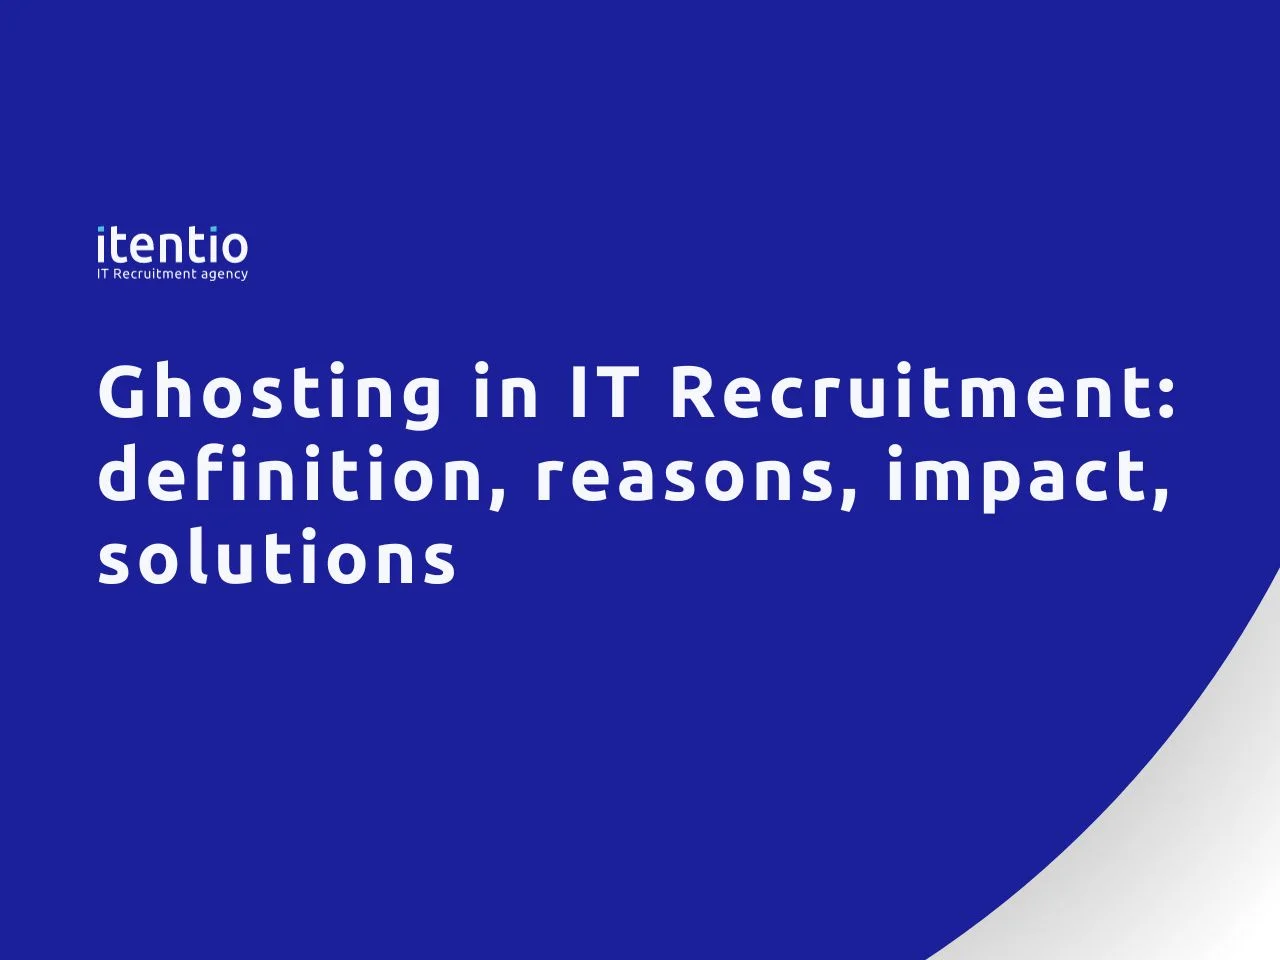 Ghosting in IT Recruitment definition, reasons, impact, solutions